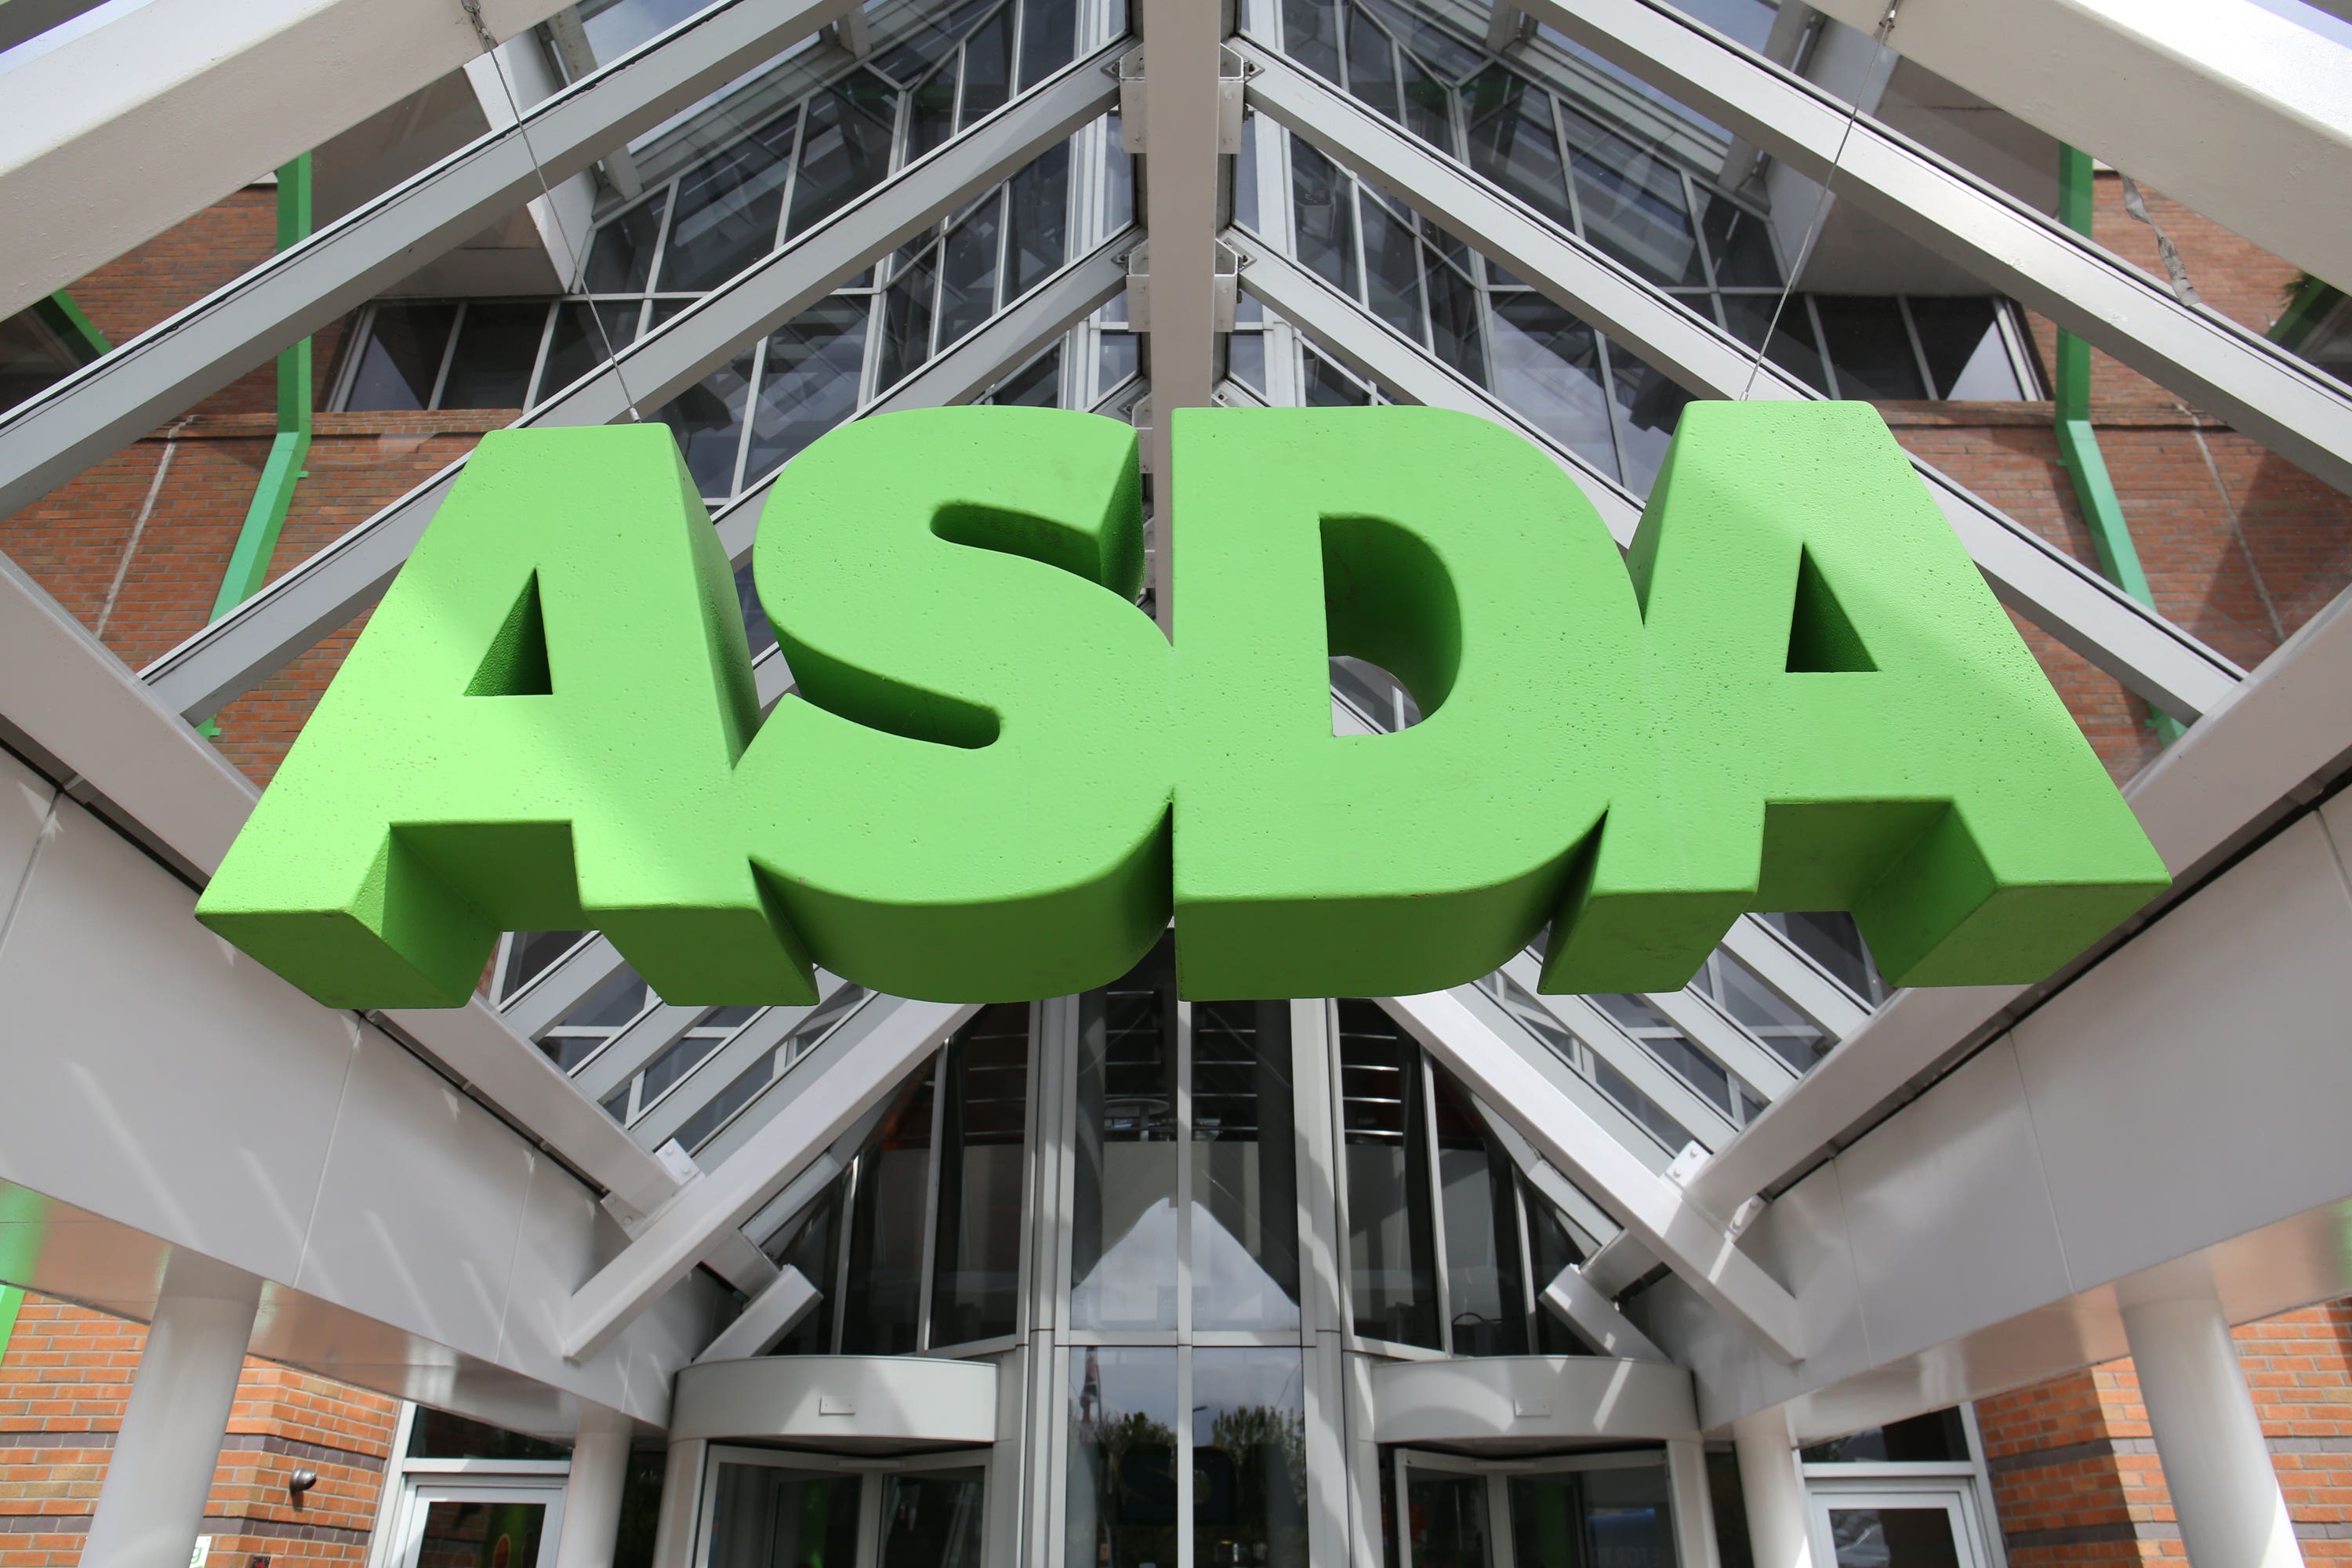 Asda announced it will be limiting customers to a maximum of three items